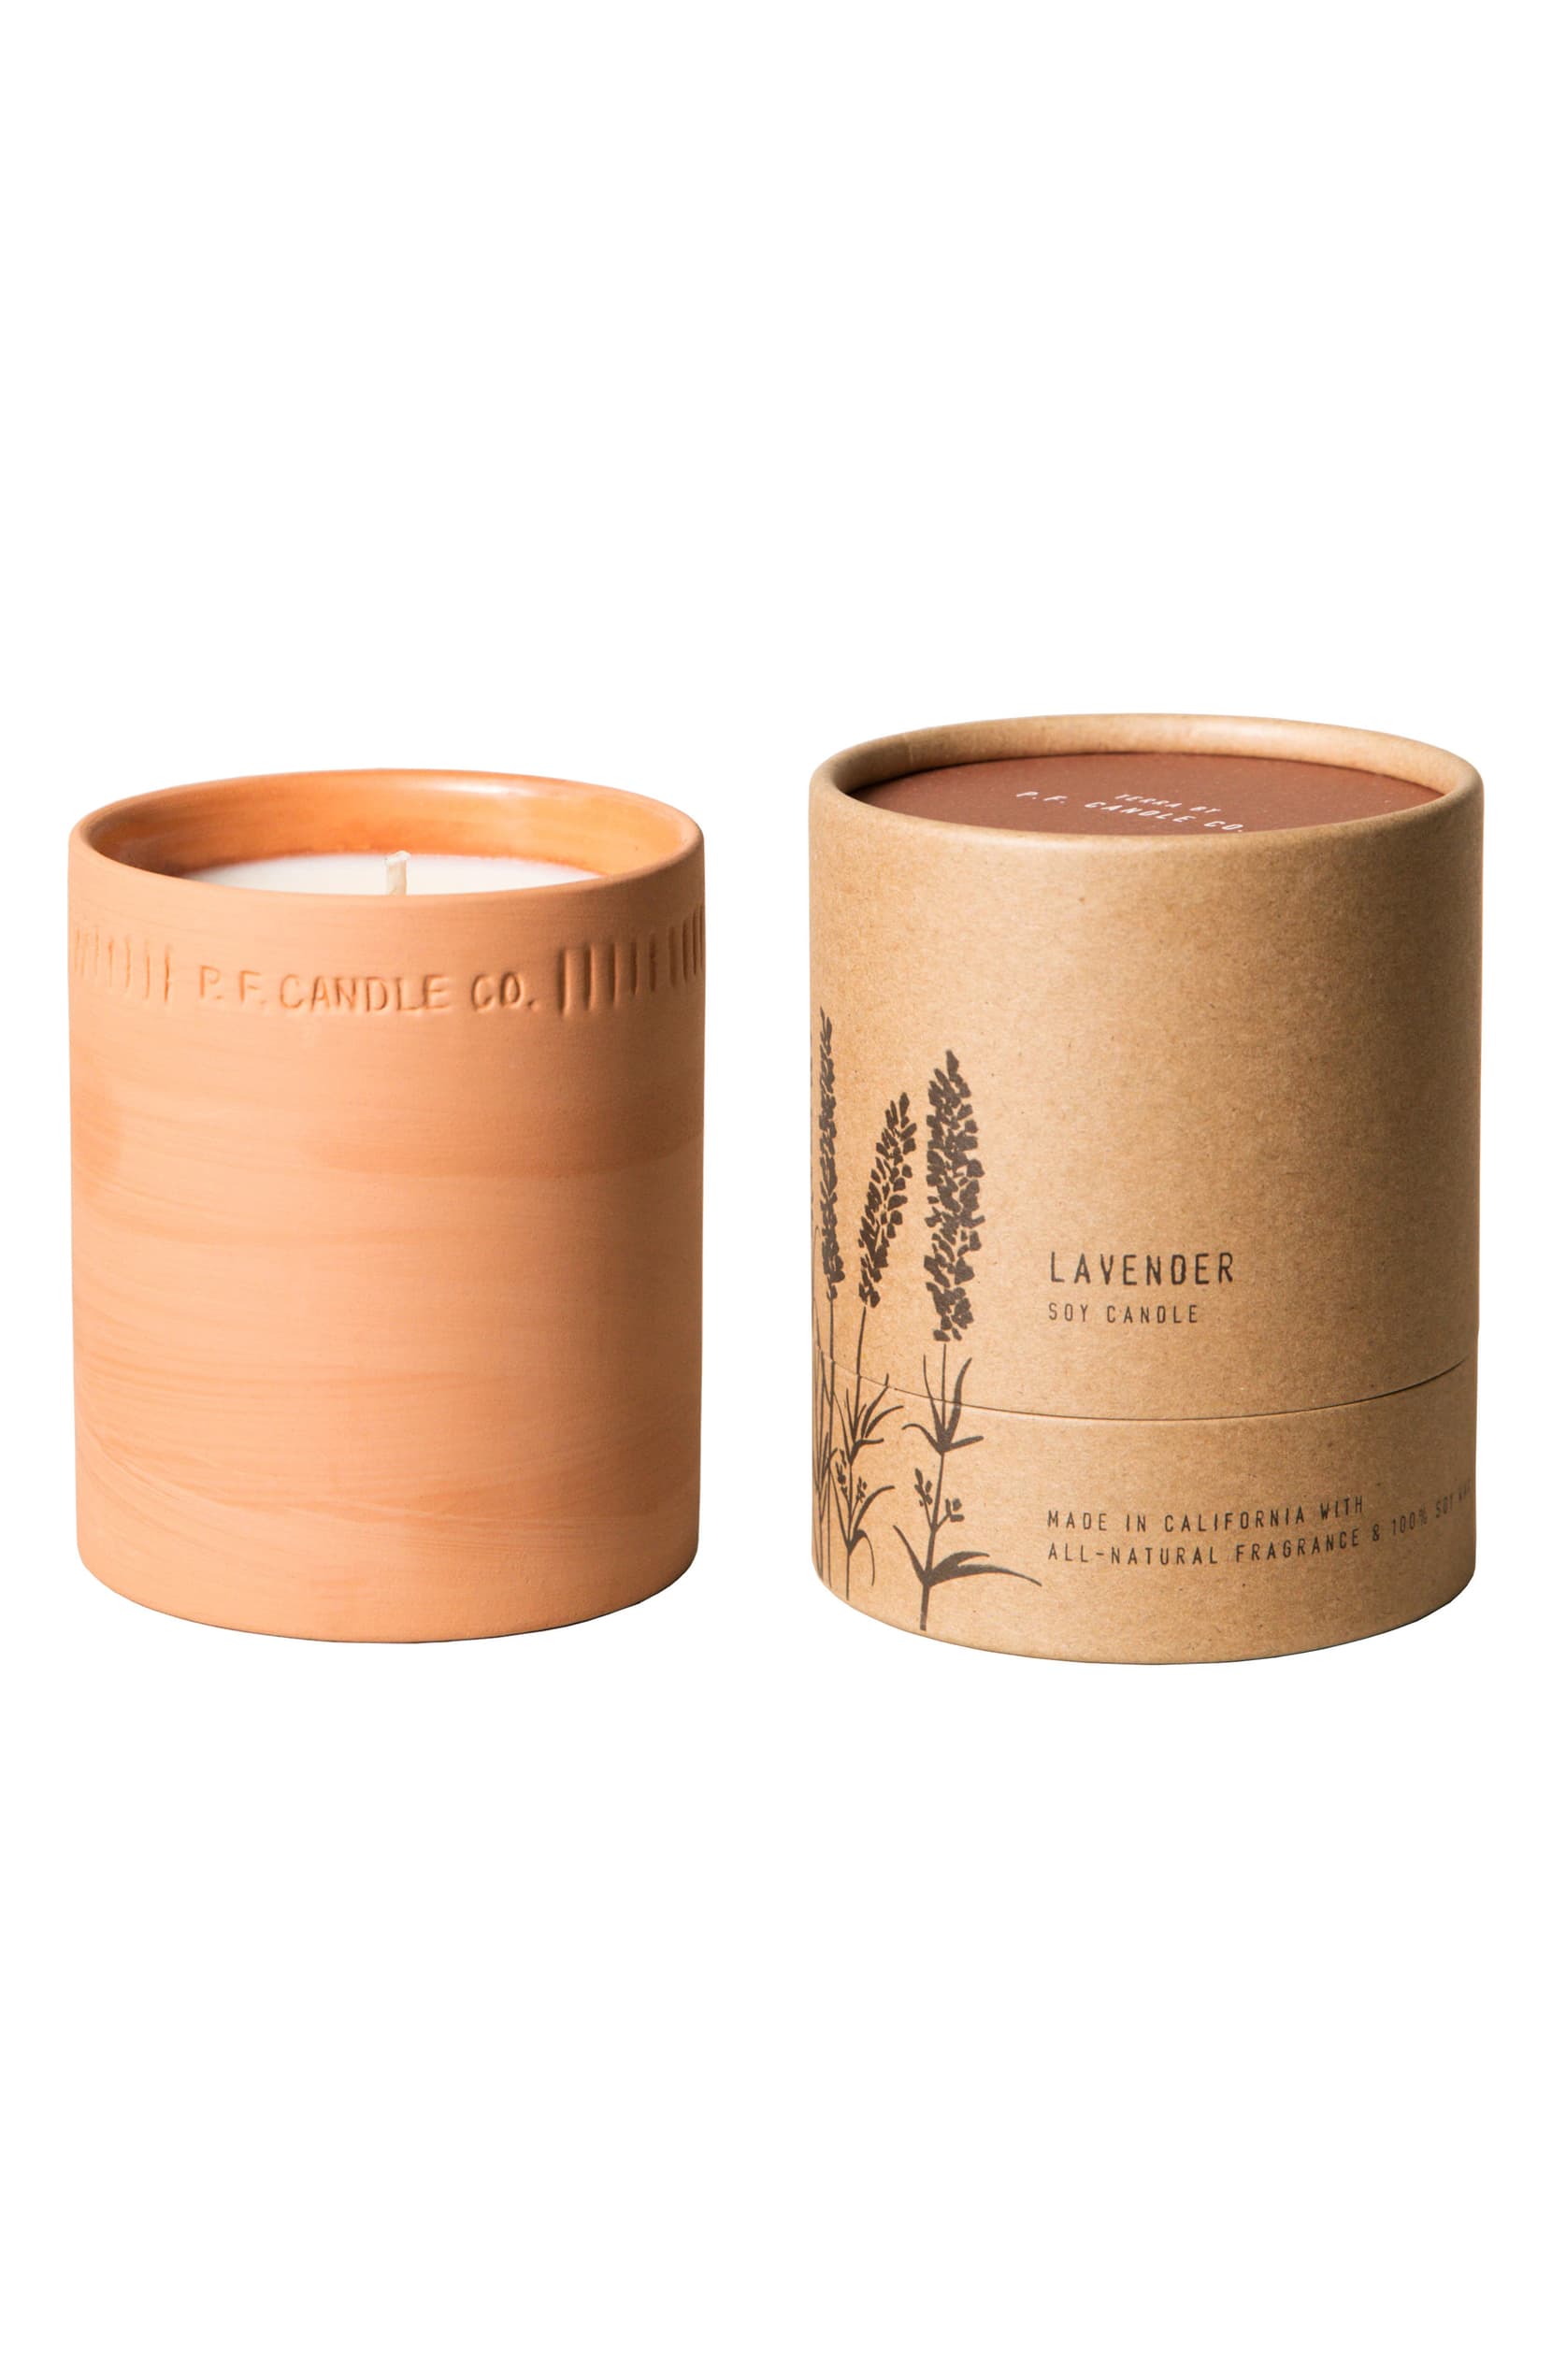 P.F. Candle Co. Lavender Terra Candle